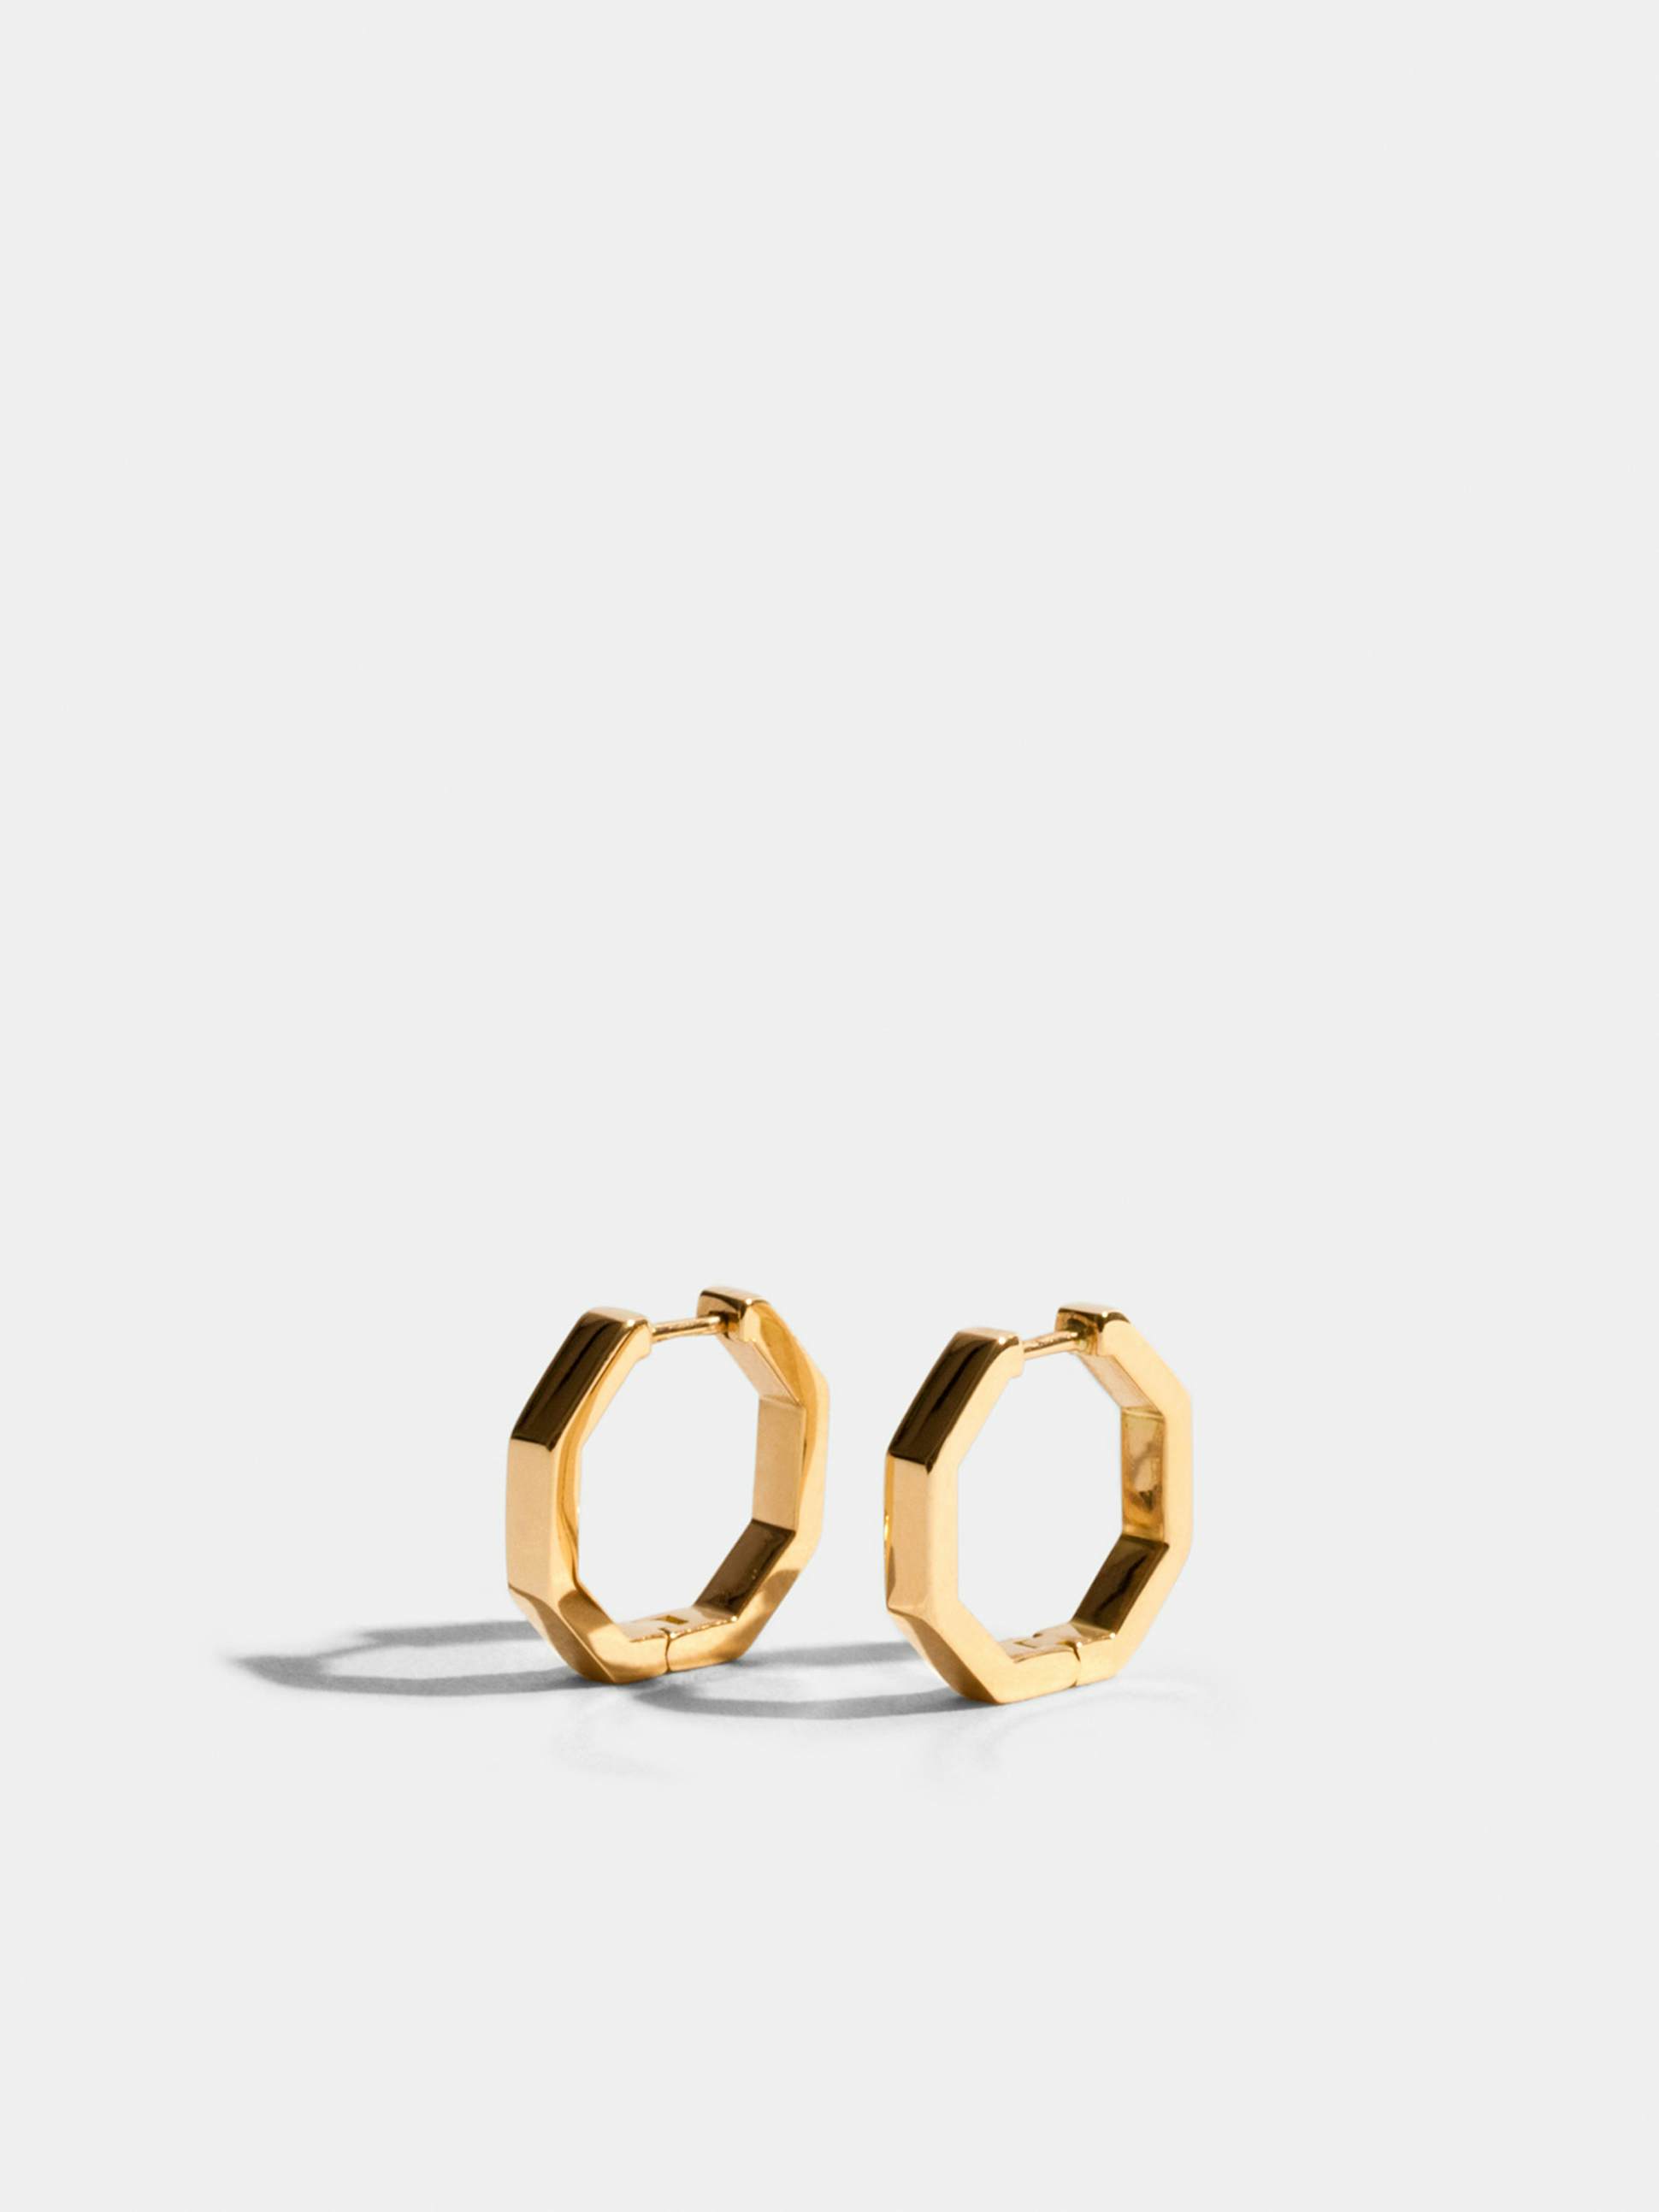 Octogone 13mm earrings in 18k Fairmined ethical yellow gold, the pair.